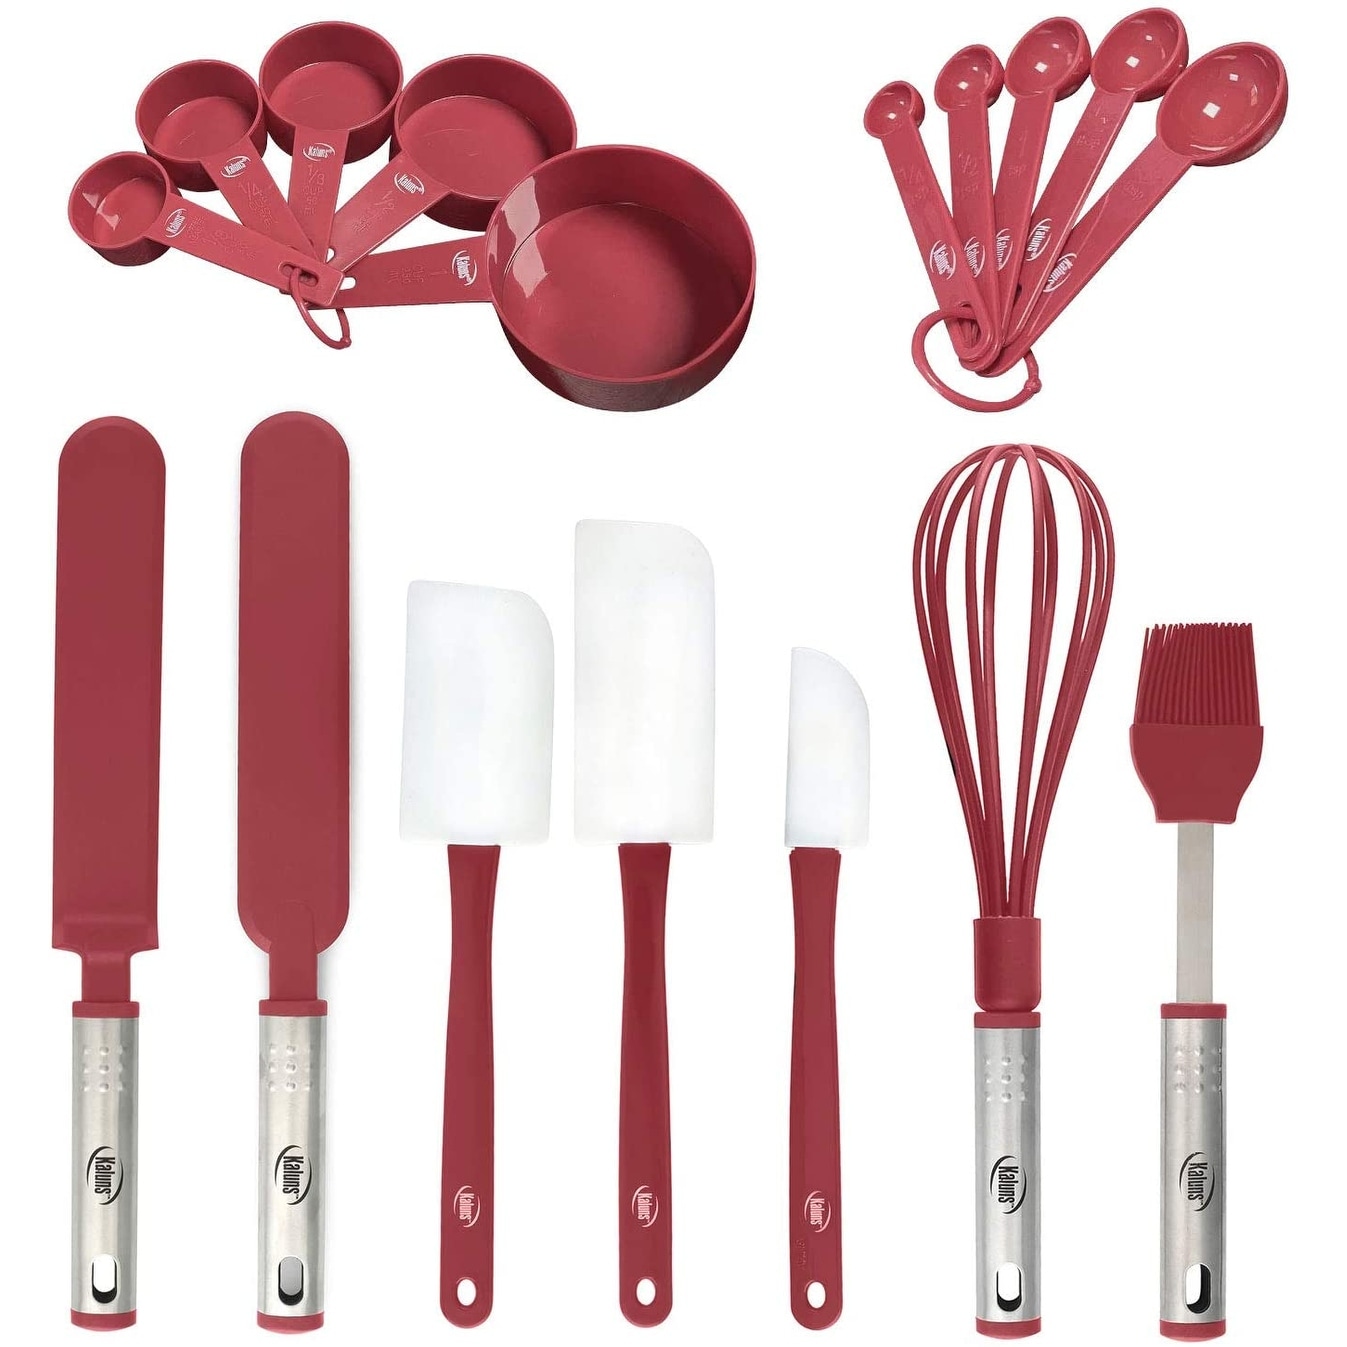 https://ak1.ostkcdn.com/images/products/is/images/direct/8c85a86dd8ff81e50f87189f5d85c7e719044138/Kitchen-Utensil-set---Nylon---Stainless-Steel-Cooking---Baking-Supplies---Non-Stick-and-Heat-Resistant-Cookware-set---3-Sizes.jpg